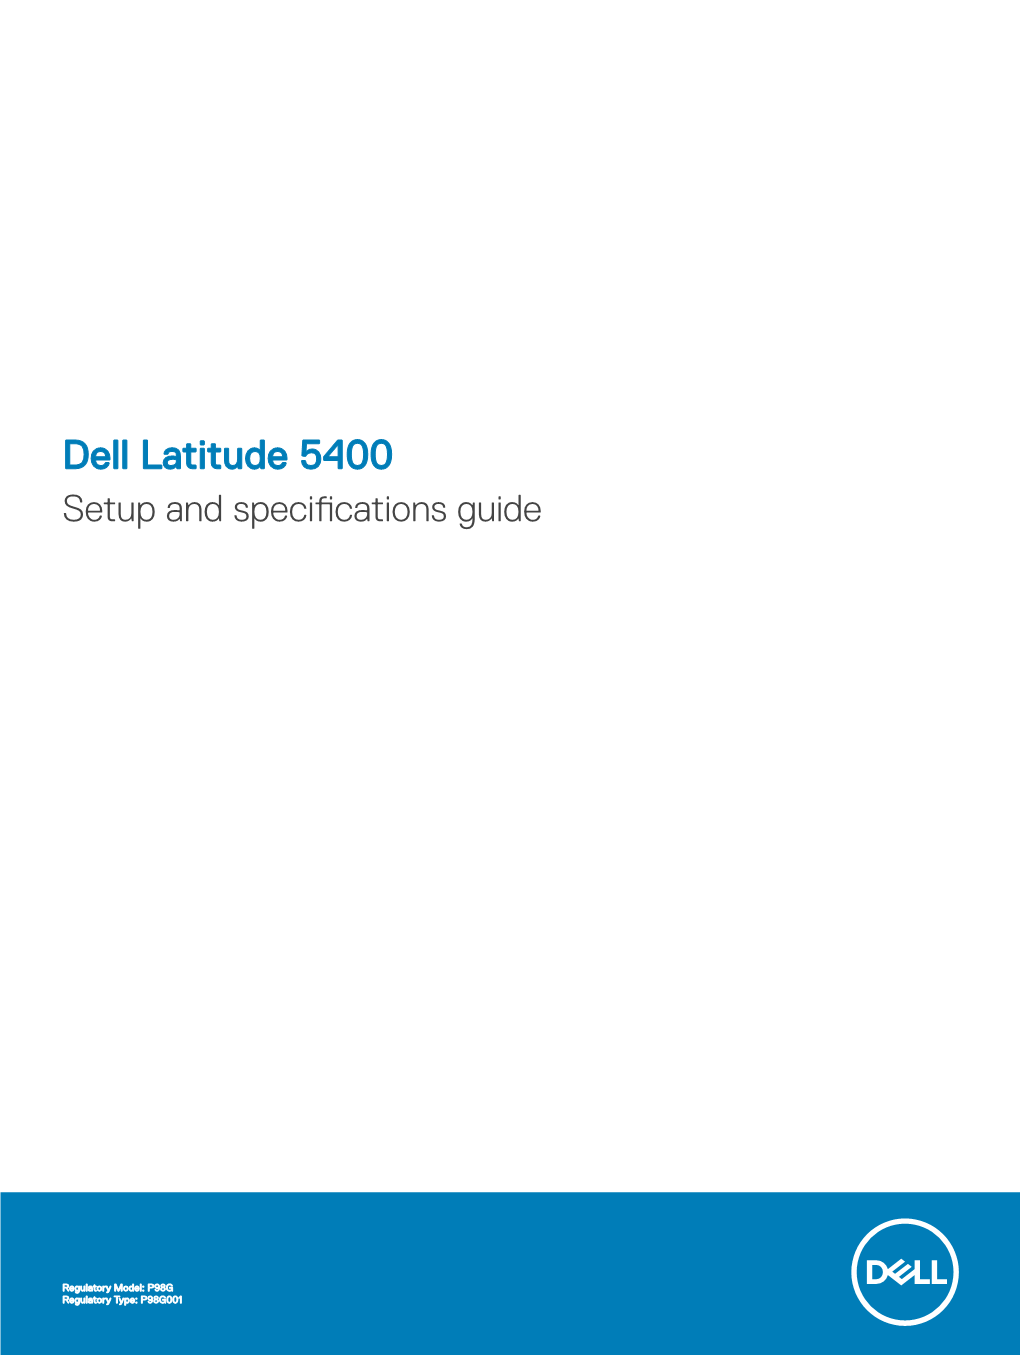 Dell Latitude 5400 Setup and Specifications Guide